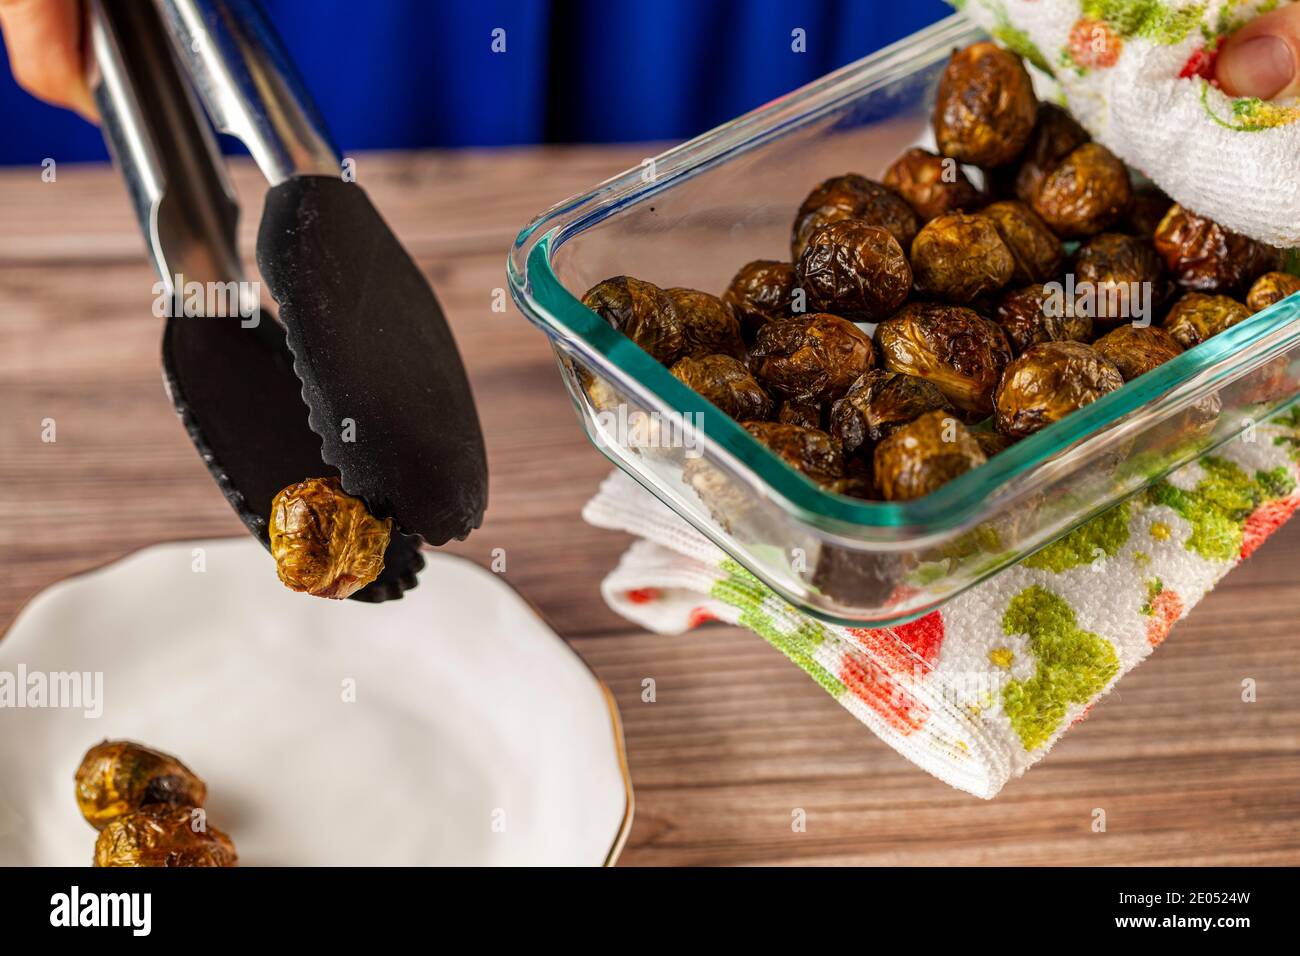 Close up isolated image of a thick glass bowl of cooked and seasoned Brussel sprouts being held with kitchen cloth and served into porcelain plate on Stock Photo